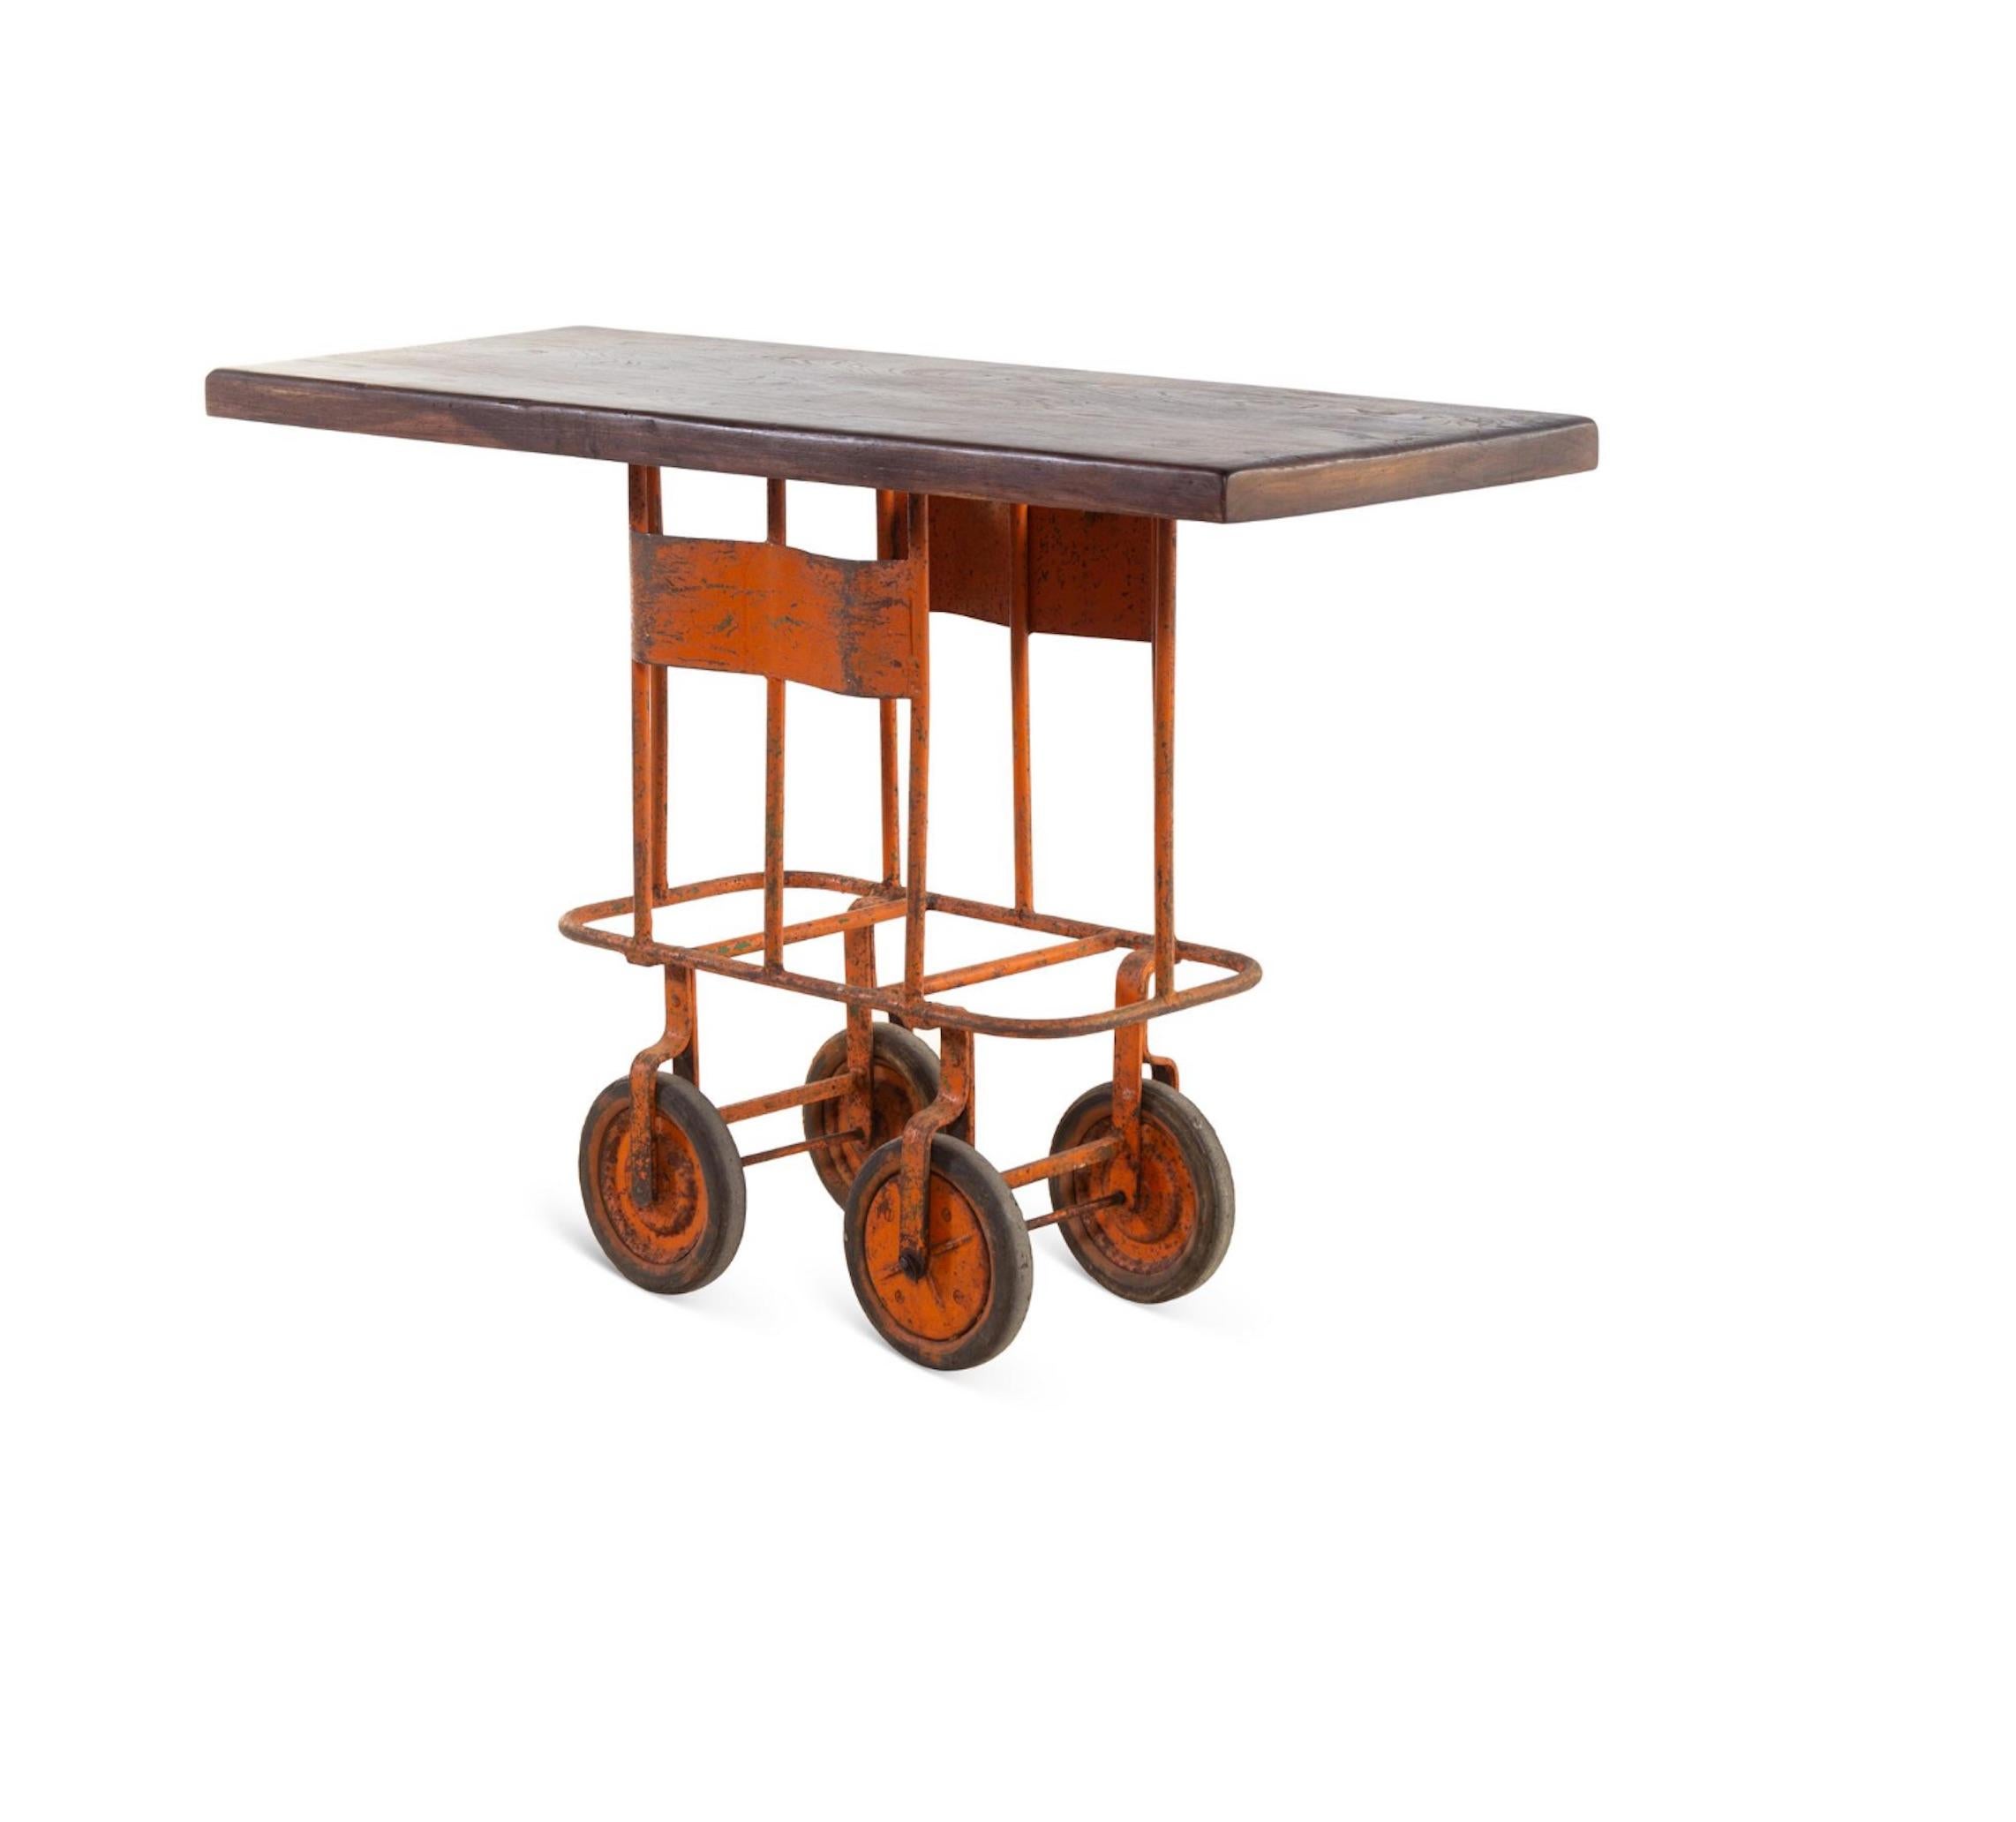 North American Industrial Cart Base Converted into Kitchen Island or Bar Cart, Great Color